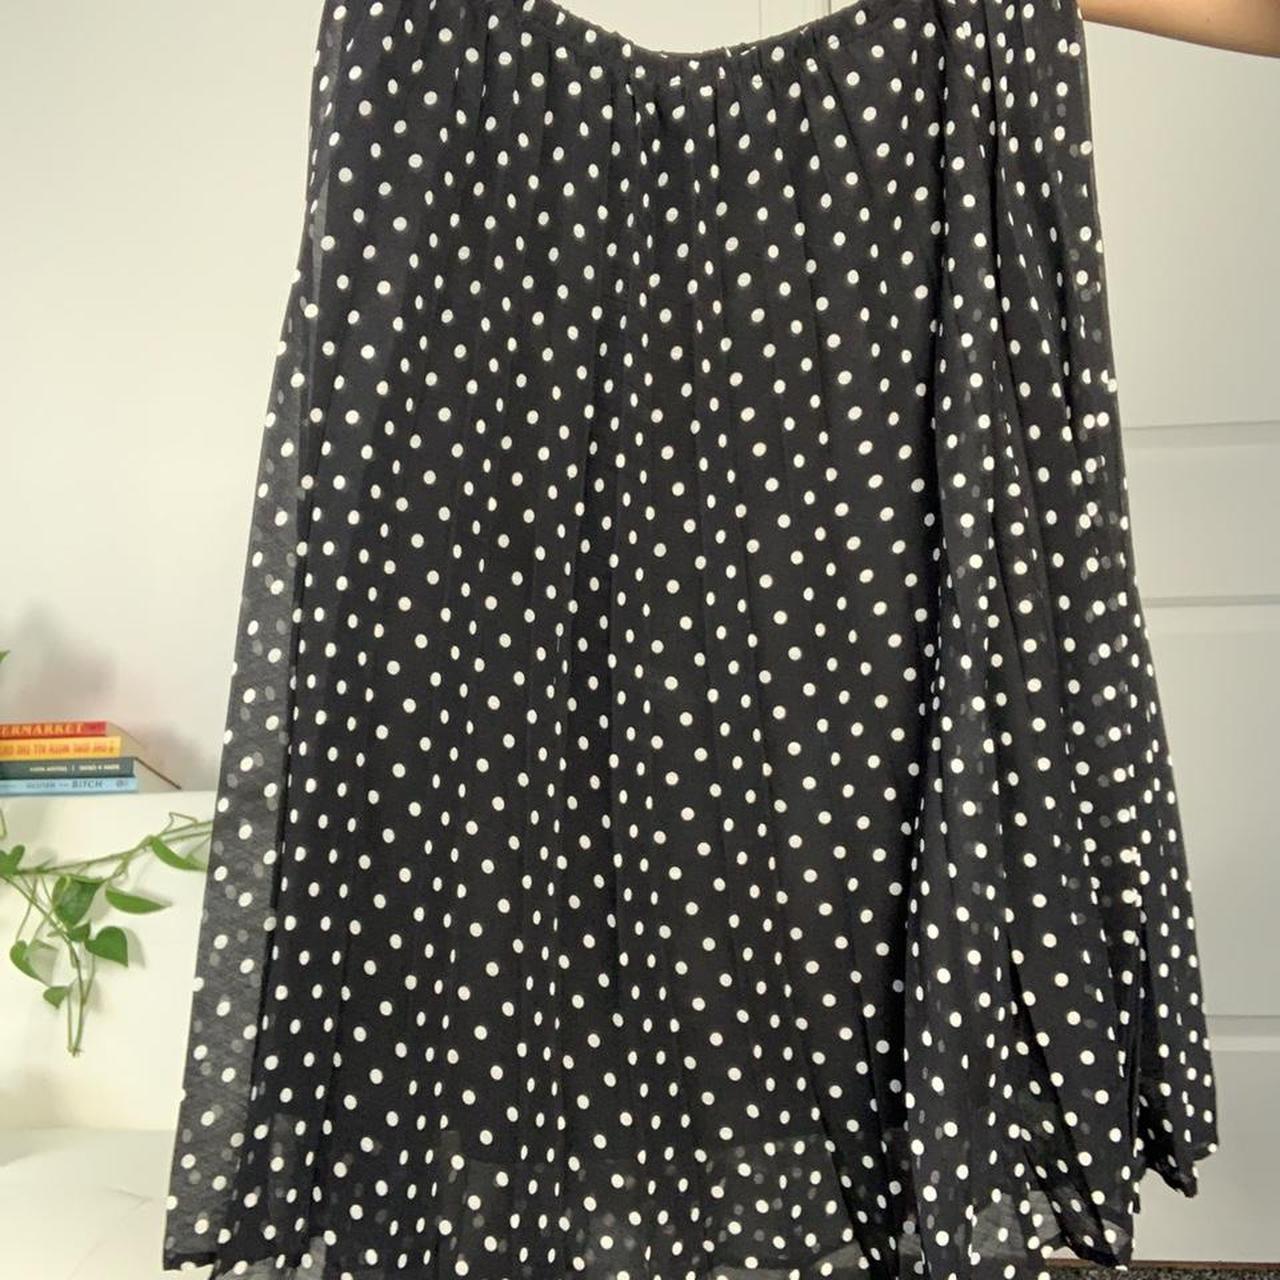 Product Image 4 - Black with white polka dot